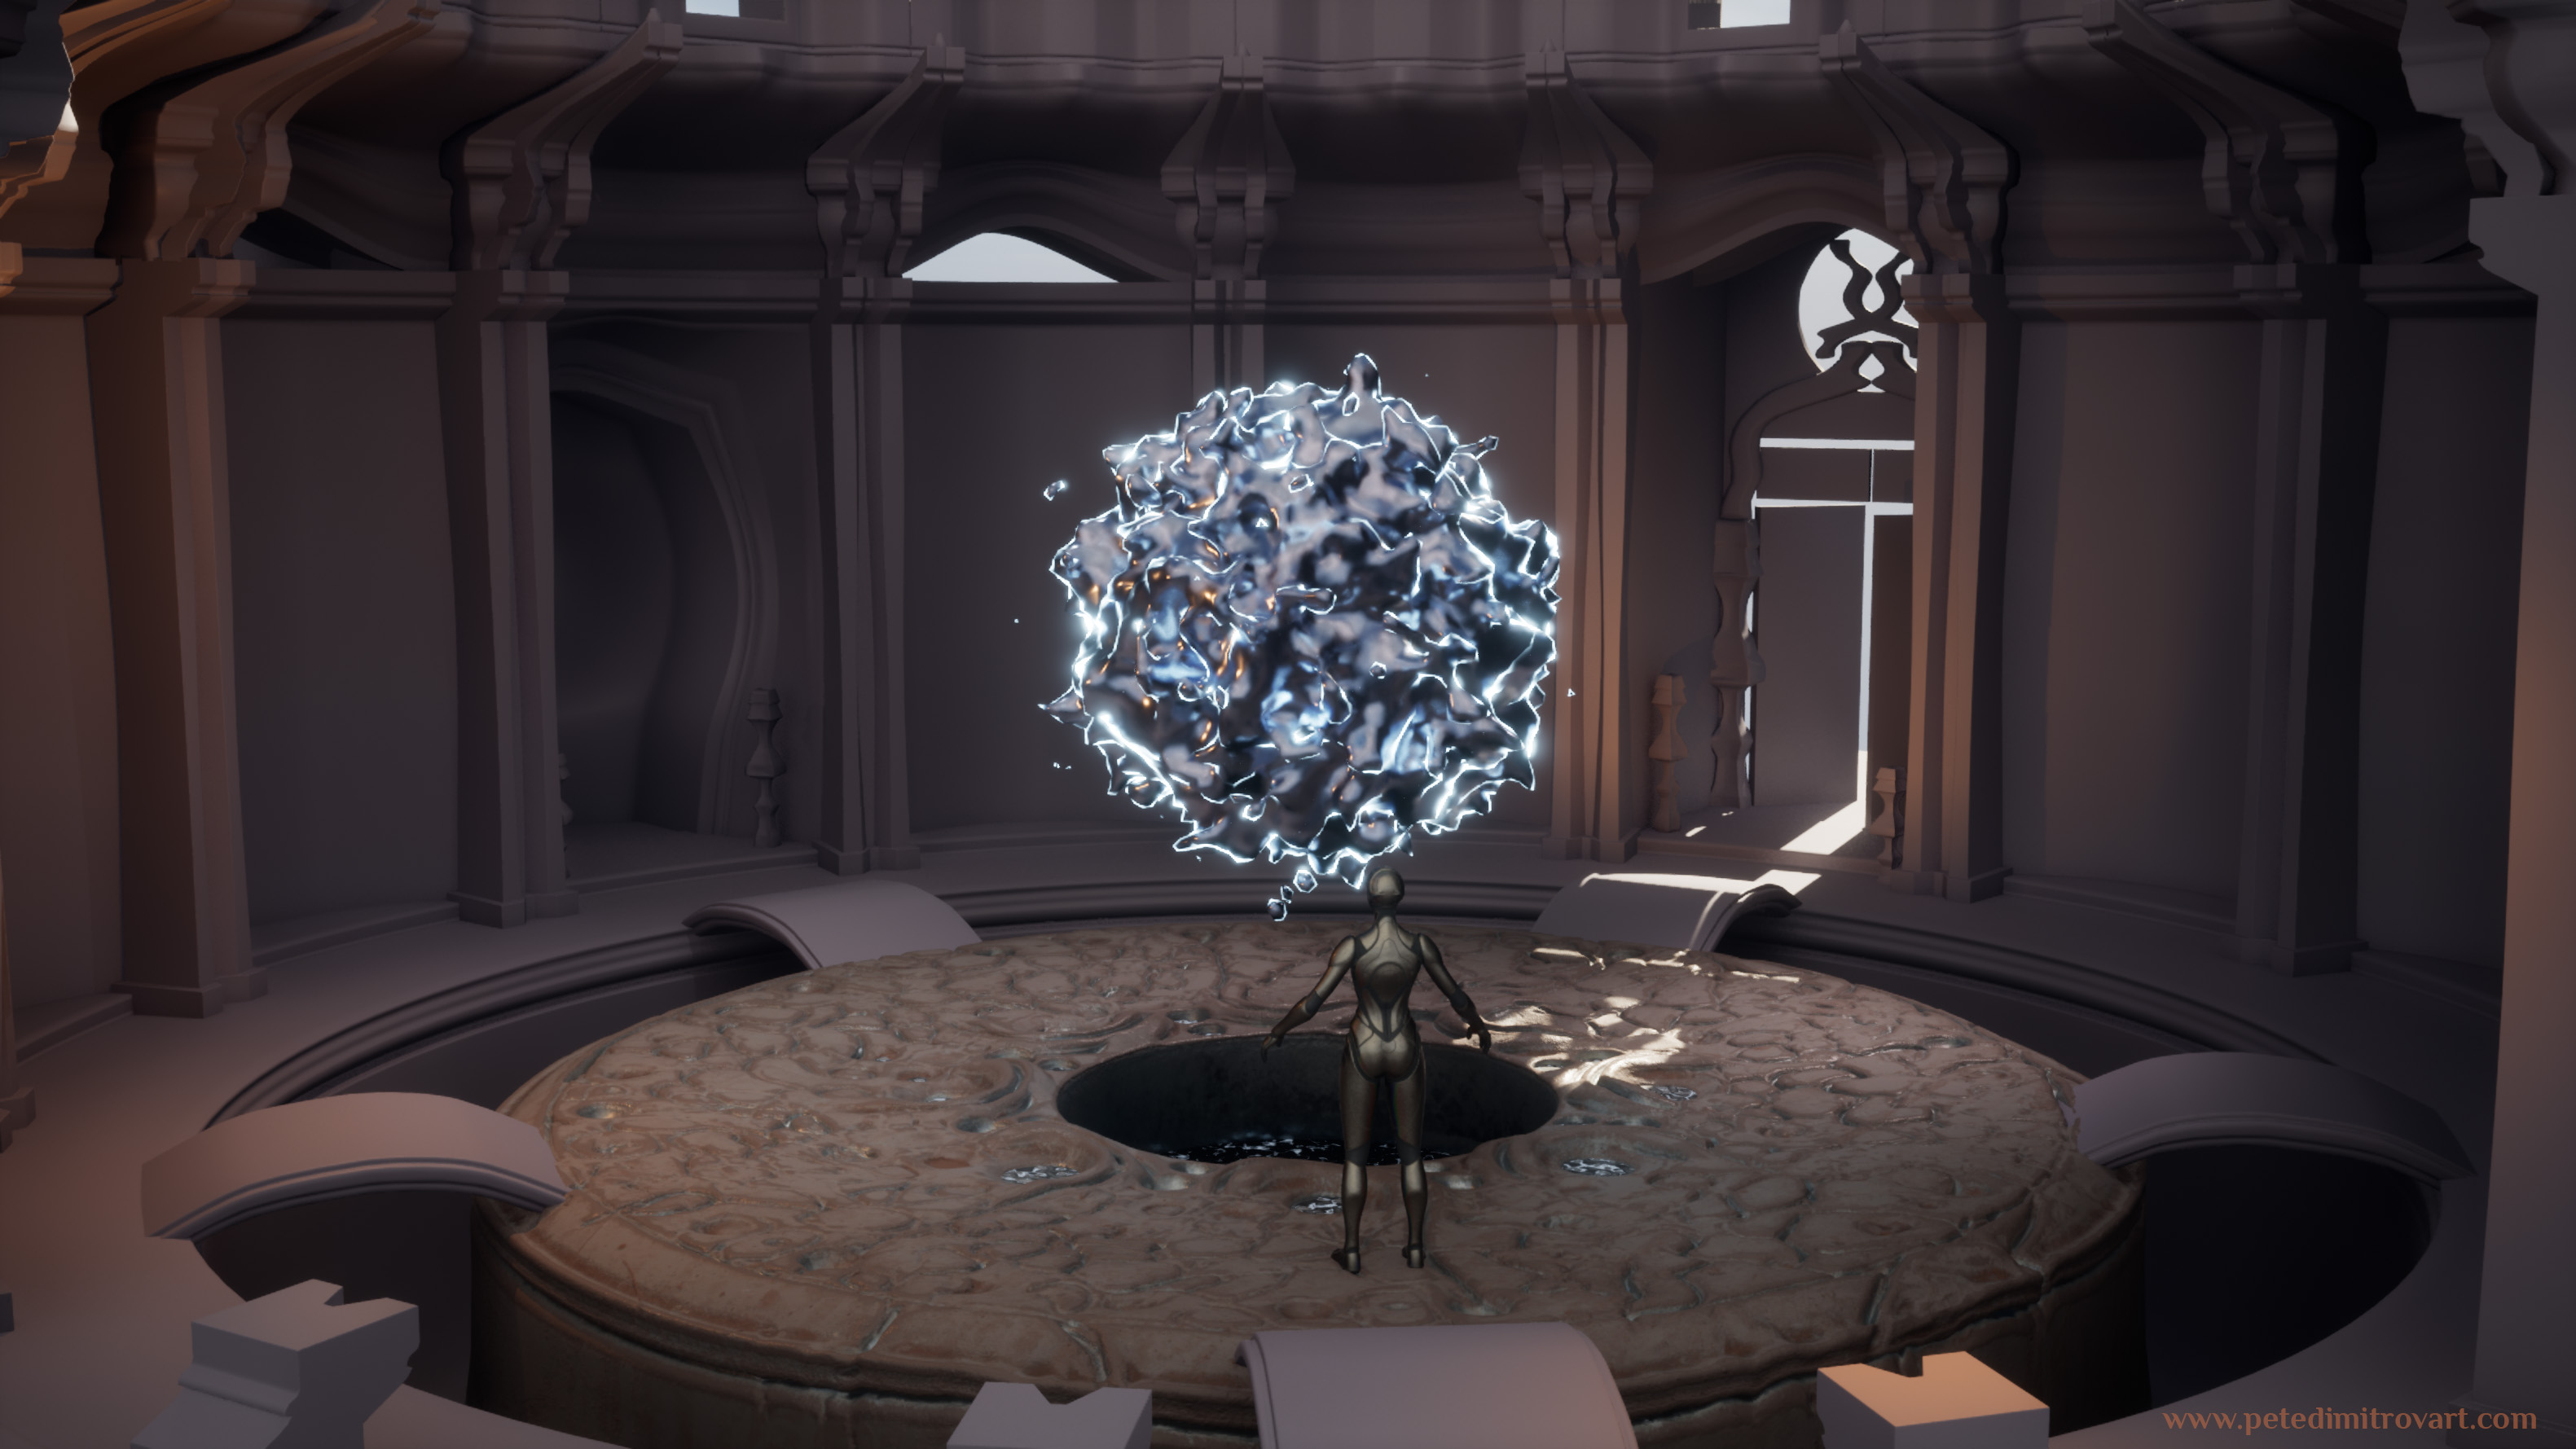 Another Unreal 5 screenshot. Camera angle is the same as the image above. This time the strong orange glow in the left parts of the circular room is removed. The gray, placeholder materials have a cooler tone in general as well. The liquid metal orb from Houdini still floats in the middle of the room, but the central platform is now connected by little bridges. There is a basin cut in the middle too, with darkness inside it.